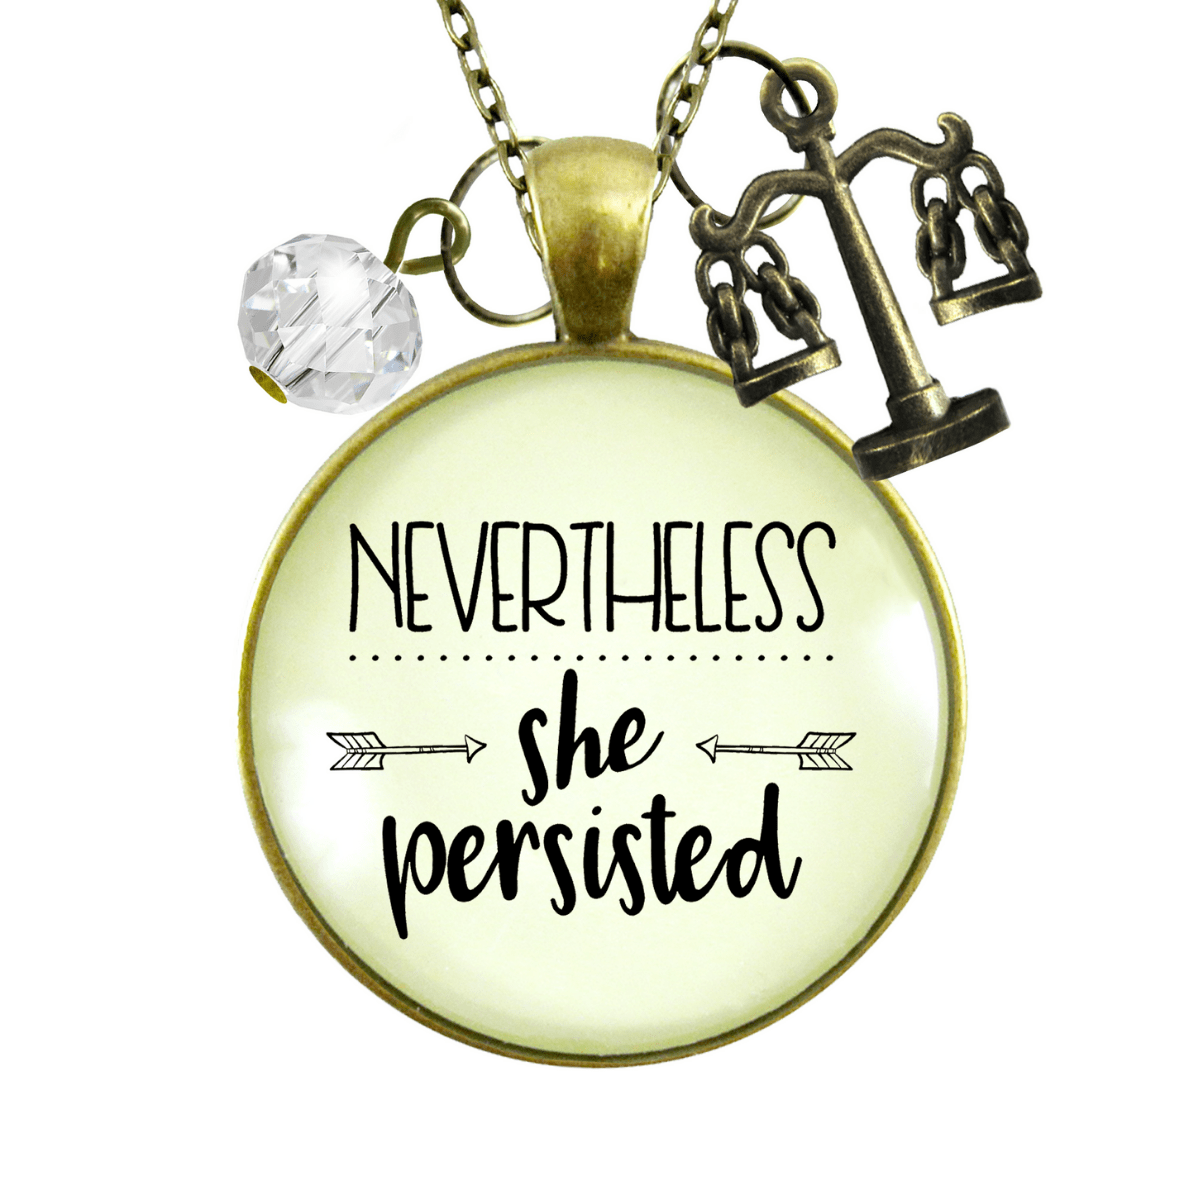 Gutsy Goodness Law School Graduation Necklace Nevertheless She Persisted - Gutsy Goodness Handmade Jewelry;Law School Graduation Necklace Nevertheless She Persisted - Gutsy Goodness Handmade Jewelry Gifts